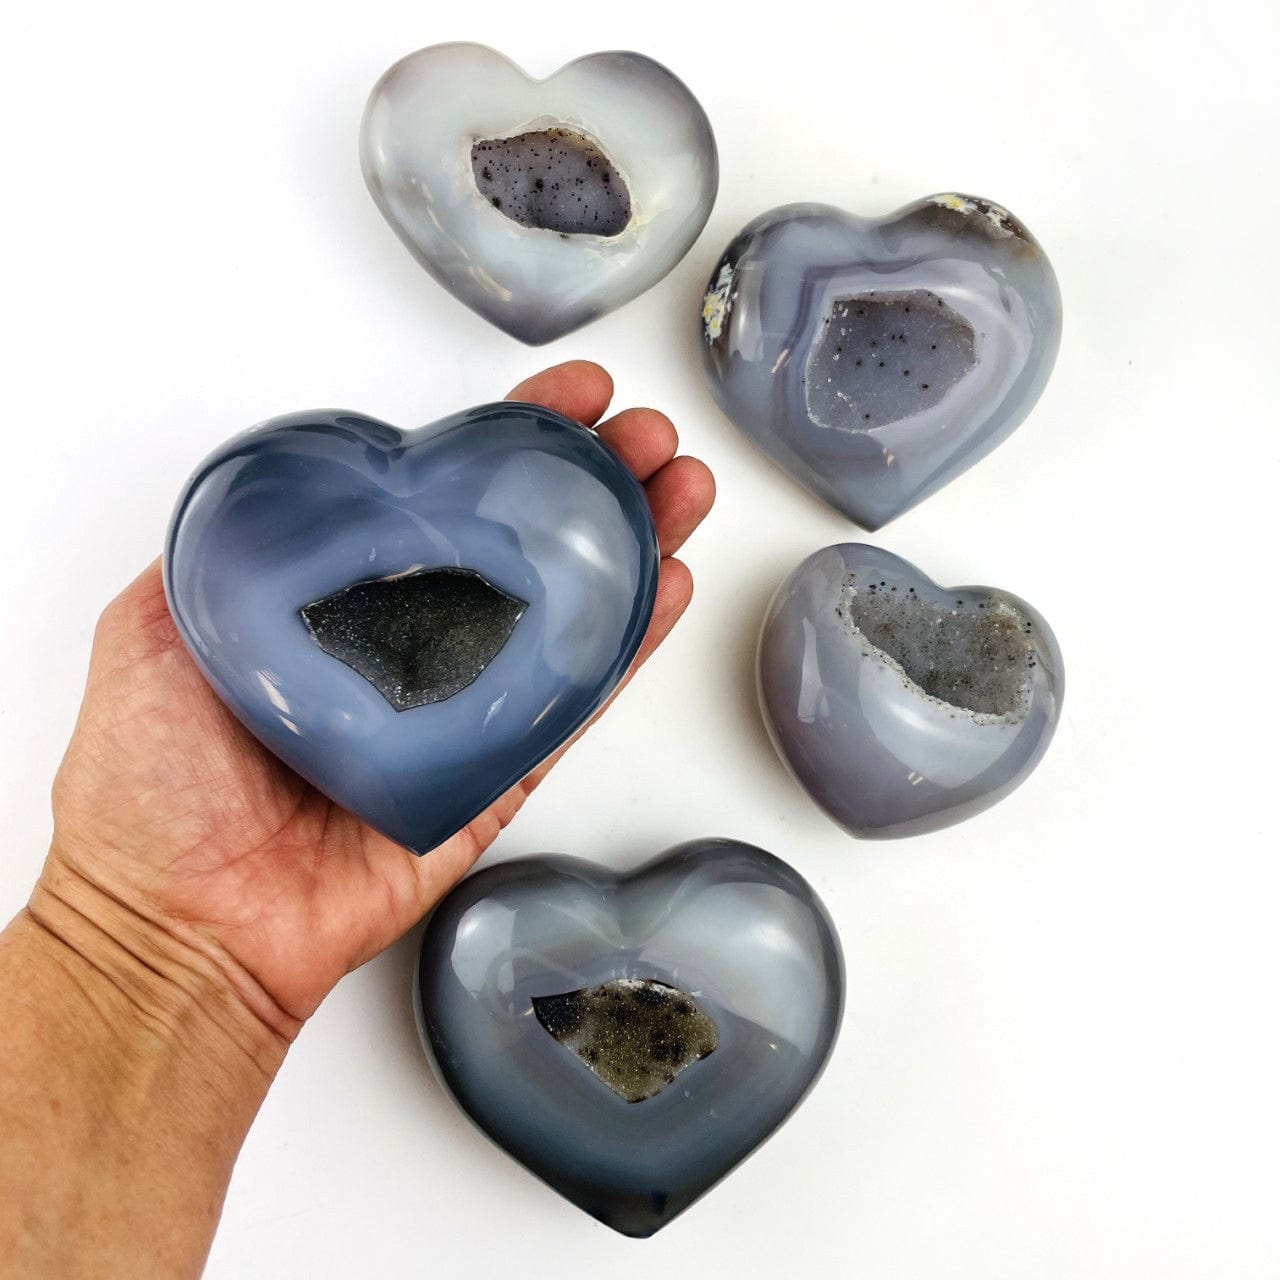 5 Agate Hearts with Druzy Centers , with one in a hand for size reference